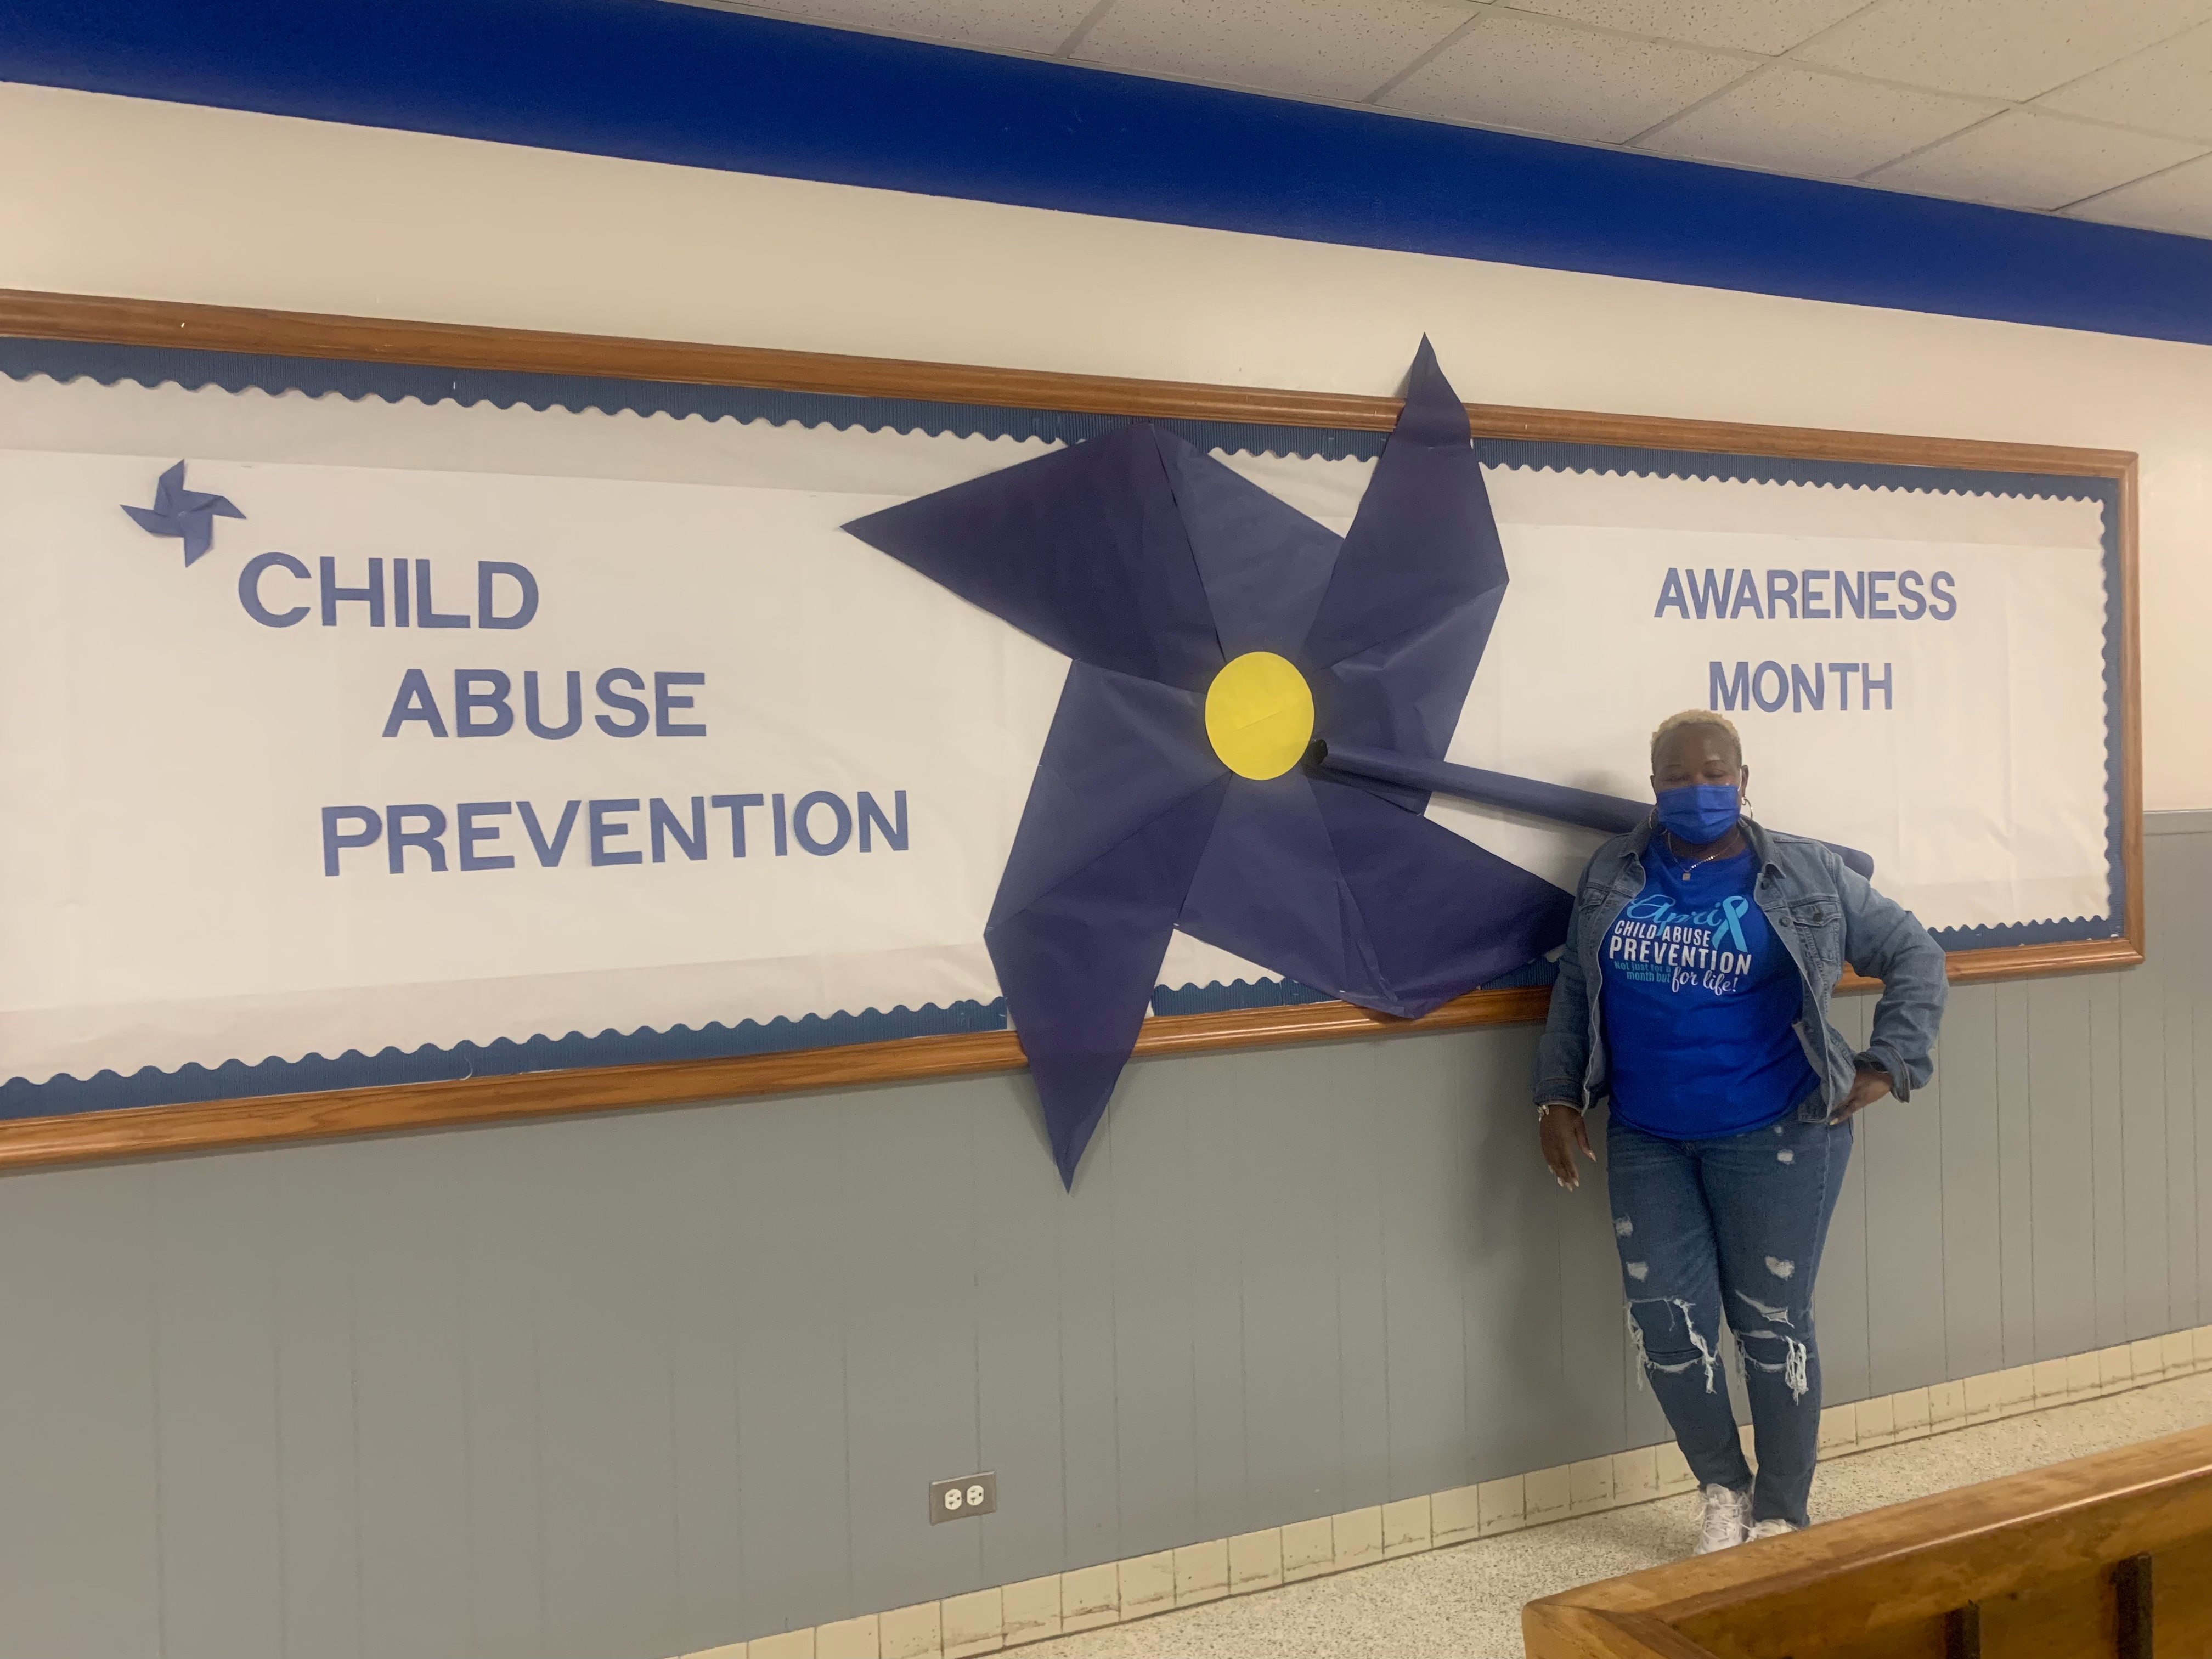 School Social Worker standing in front of bulletin board that says Child Above Prevention Awareness Month and a large cutout blue flower